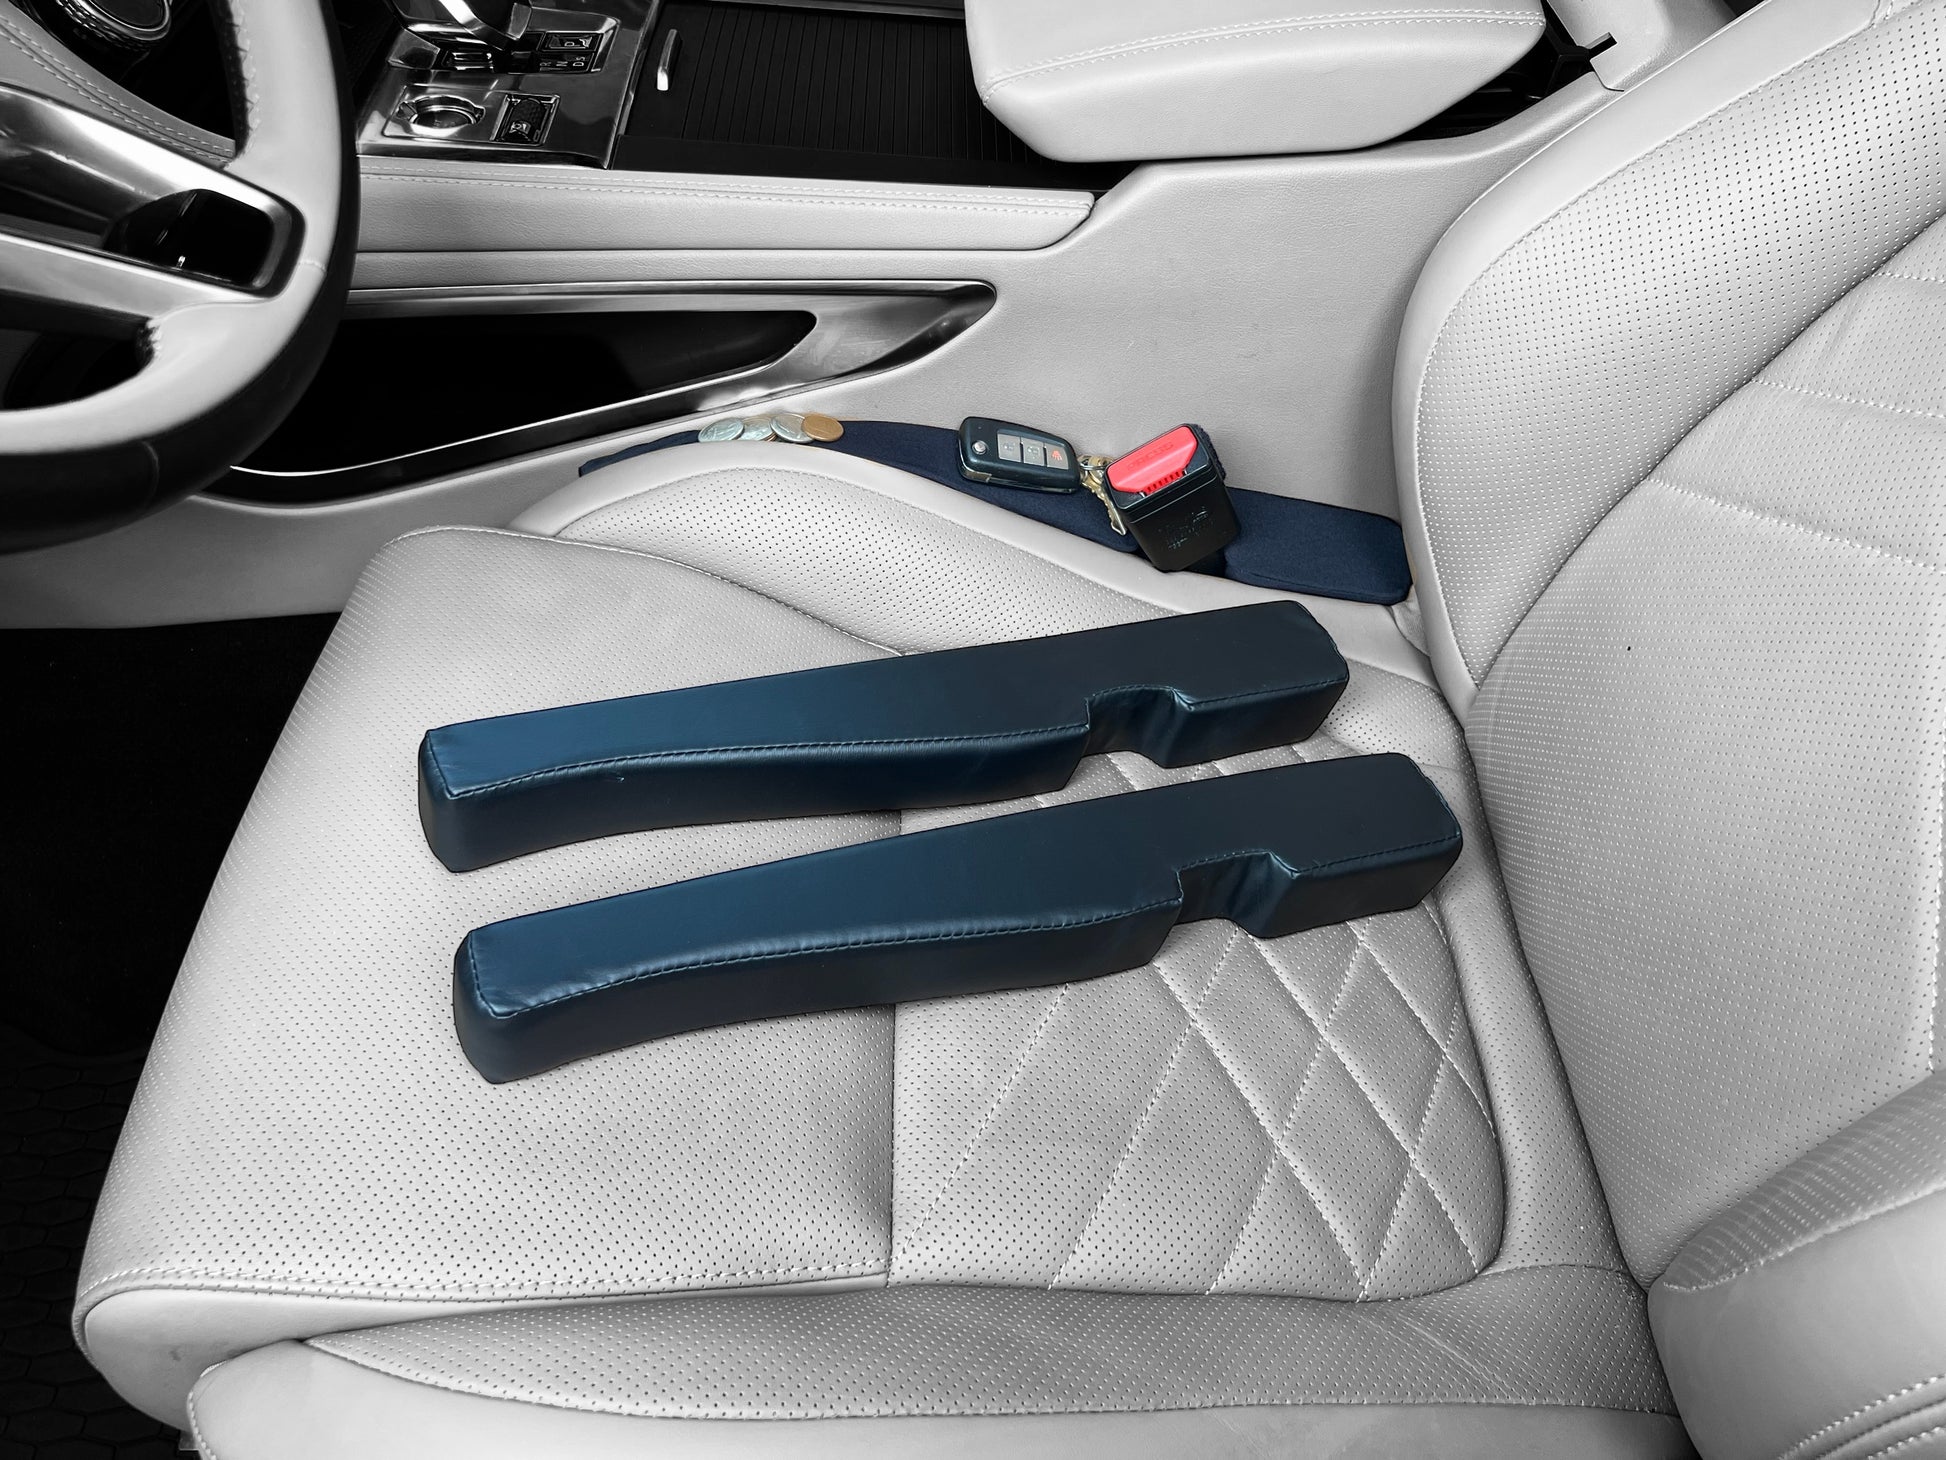  Berylins Car Seat Gap Filler 2 Pack with Seat Belt Holes, Auto  Crevice Blockers 2PCS Fill Gap in Between Seat and Console, Universal for  Most Cars Trucks SUVs to Stop Things